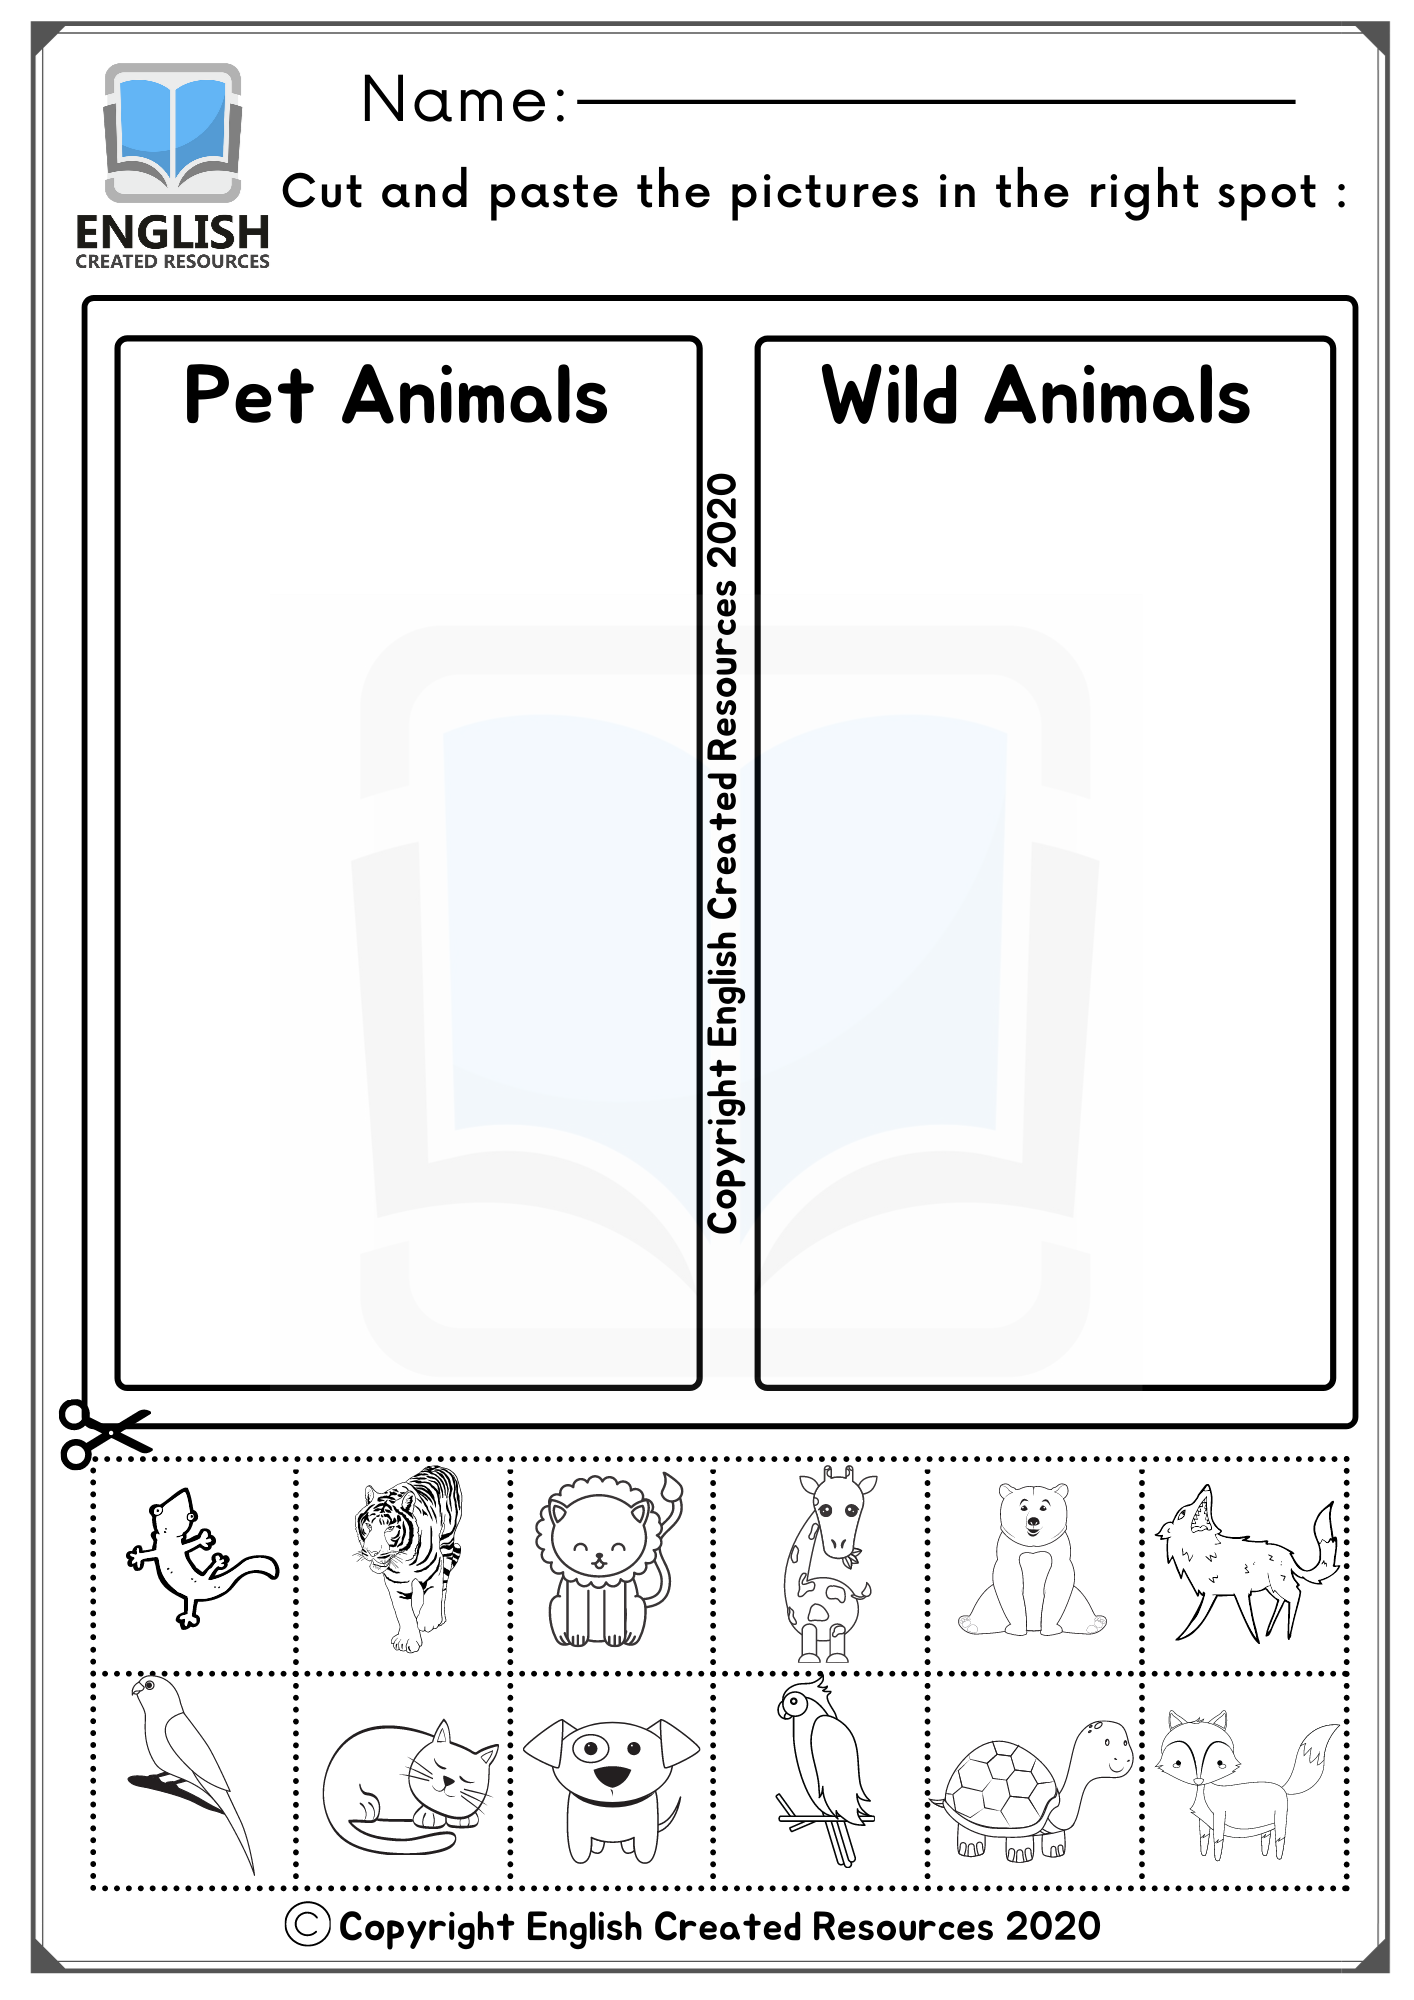 vocabulary-activities-worksheets-cut-and-paste